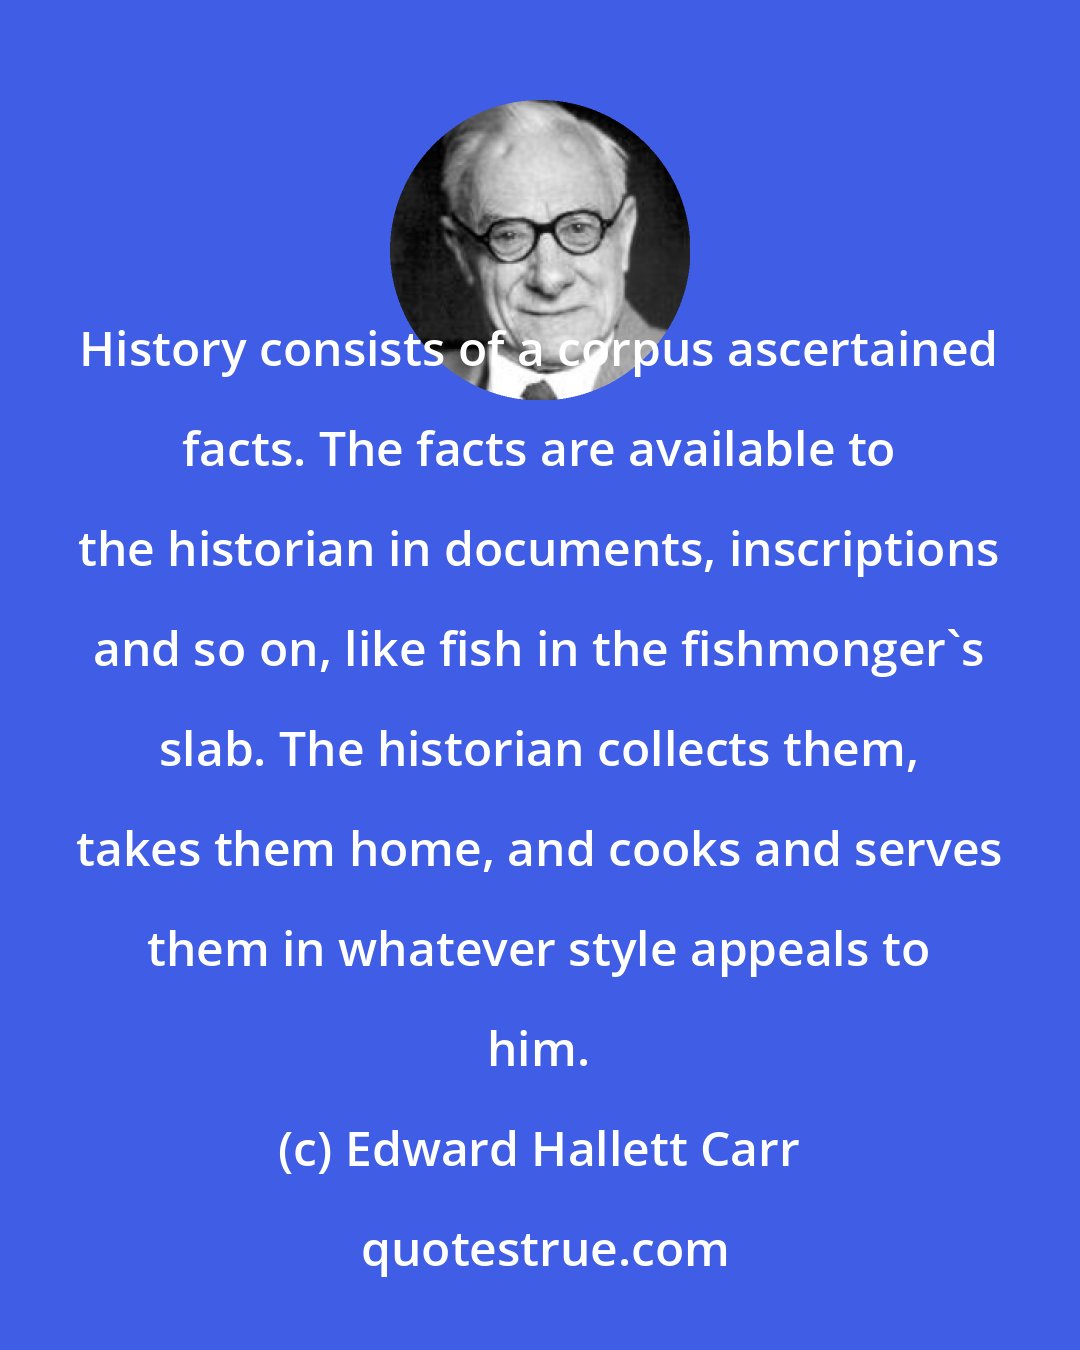 Edward Hallett Carr: History consists of a corpus ascertained facts. The facts are available to the historian in documents, inscriptions and so on, like fish in the fishmonger's slab. The historian collects them, takes them home, and cooks and serves them in whatever style appeals to him.